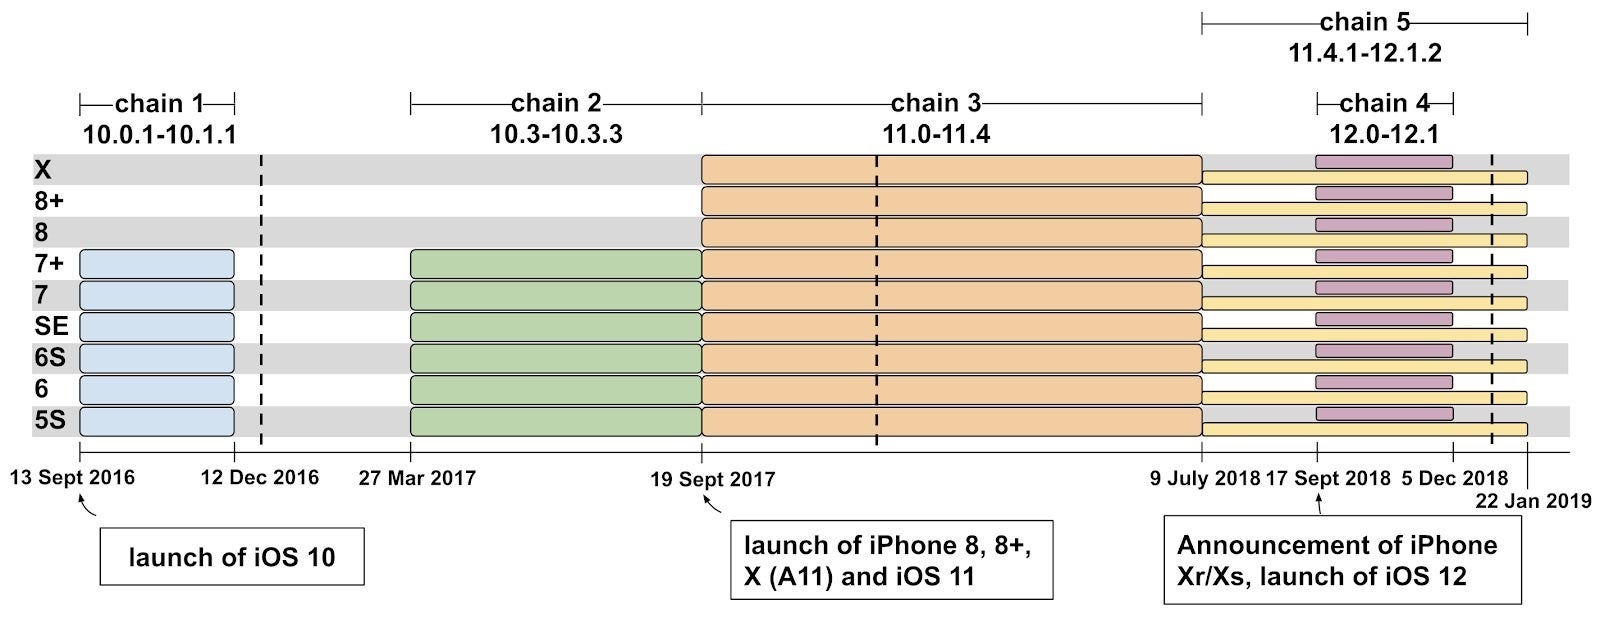 Google&#039;s Project Zero team and Threat Analysis Group found five exploit chains covering iOS 10 through iOS 12 - Apple disputes how Google characterized the iPhone vulnerability it discovered